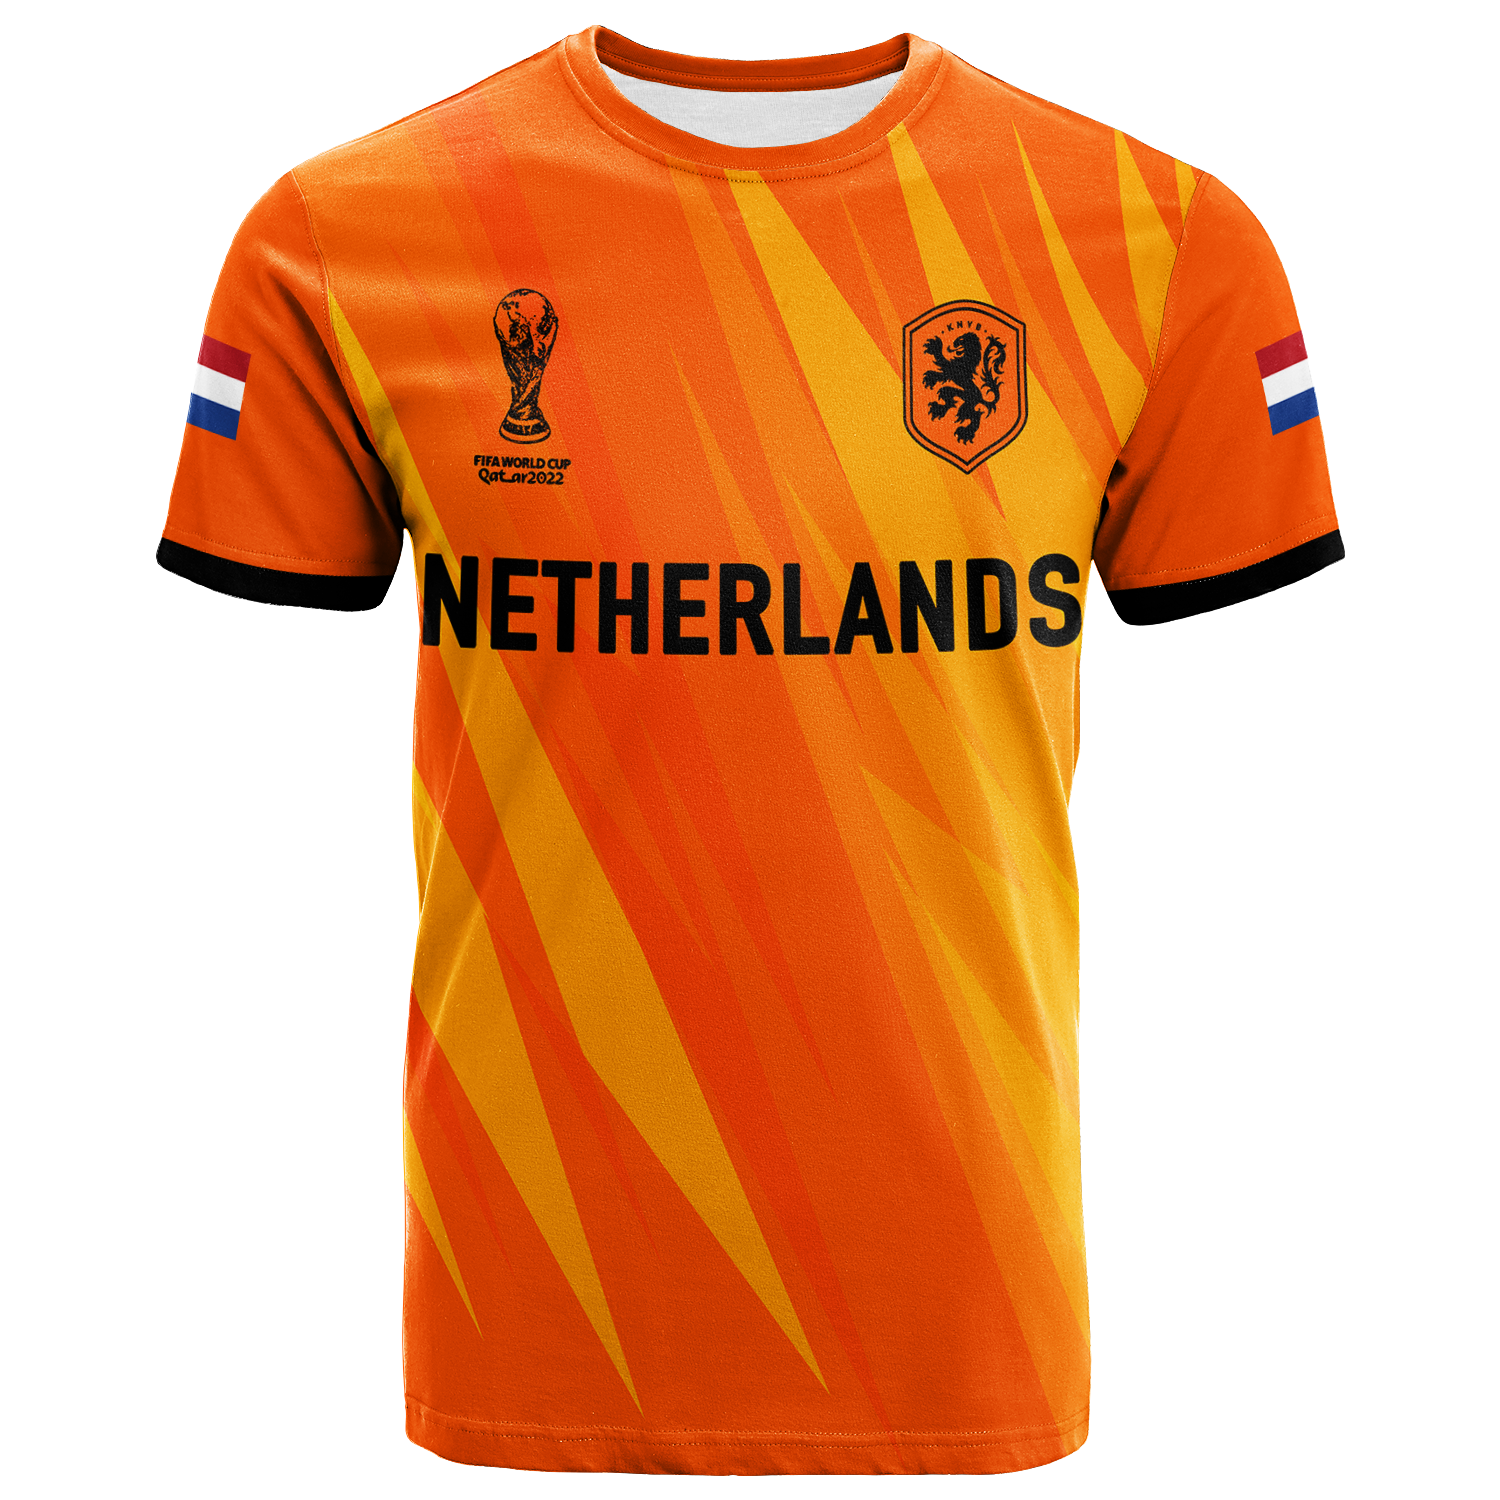 Netherlands Football World Cup 2022 Champions Pride T-Shirt 